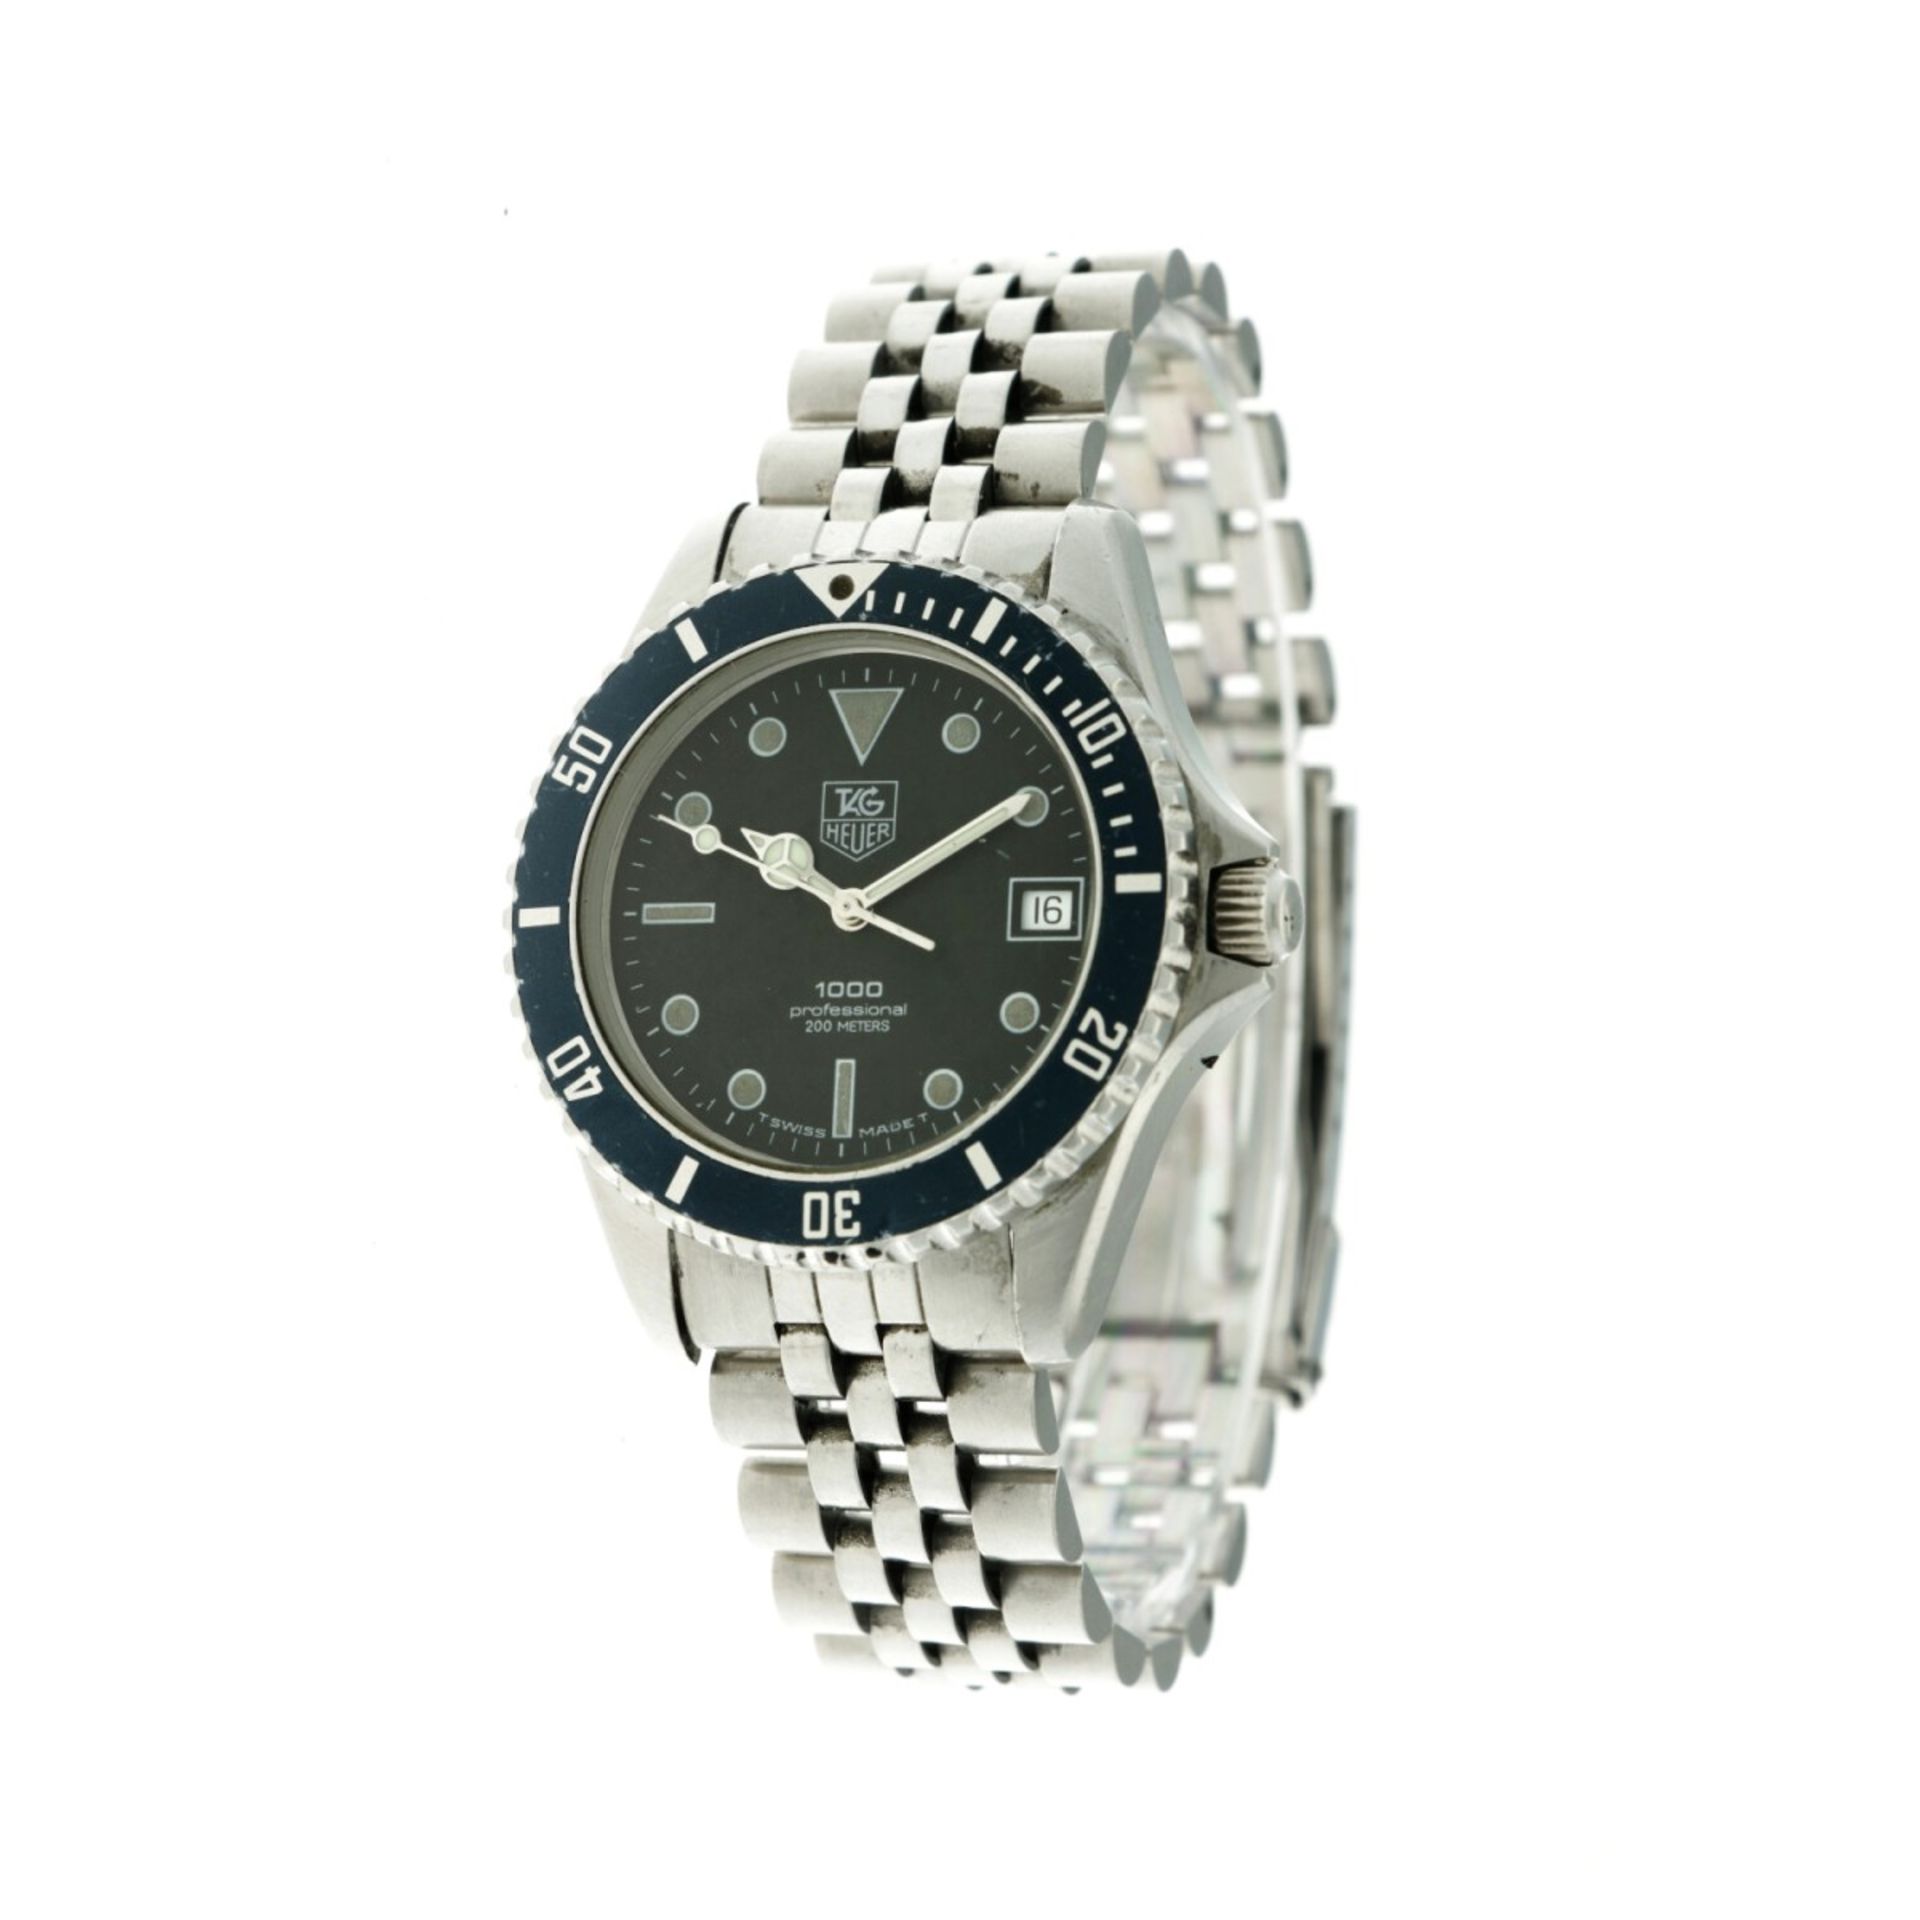 Tag Heuer 1000 Professional 980.013D - Men's watch appr. 1992. - Image 2 of 6